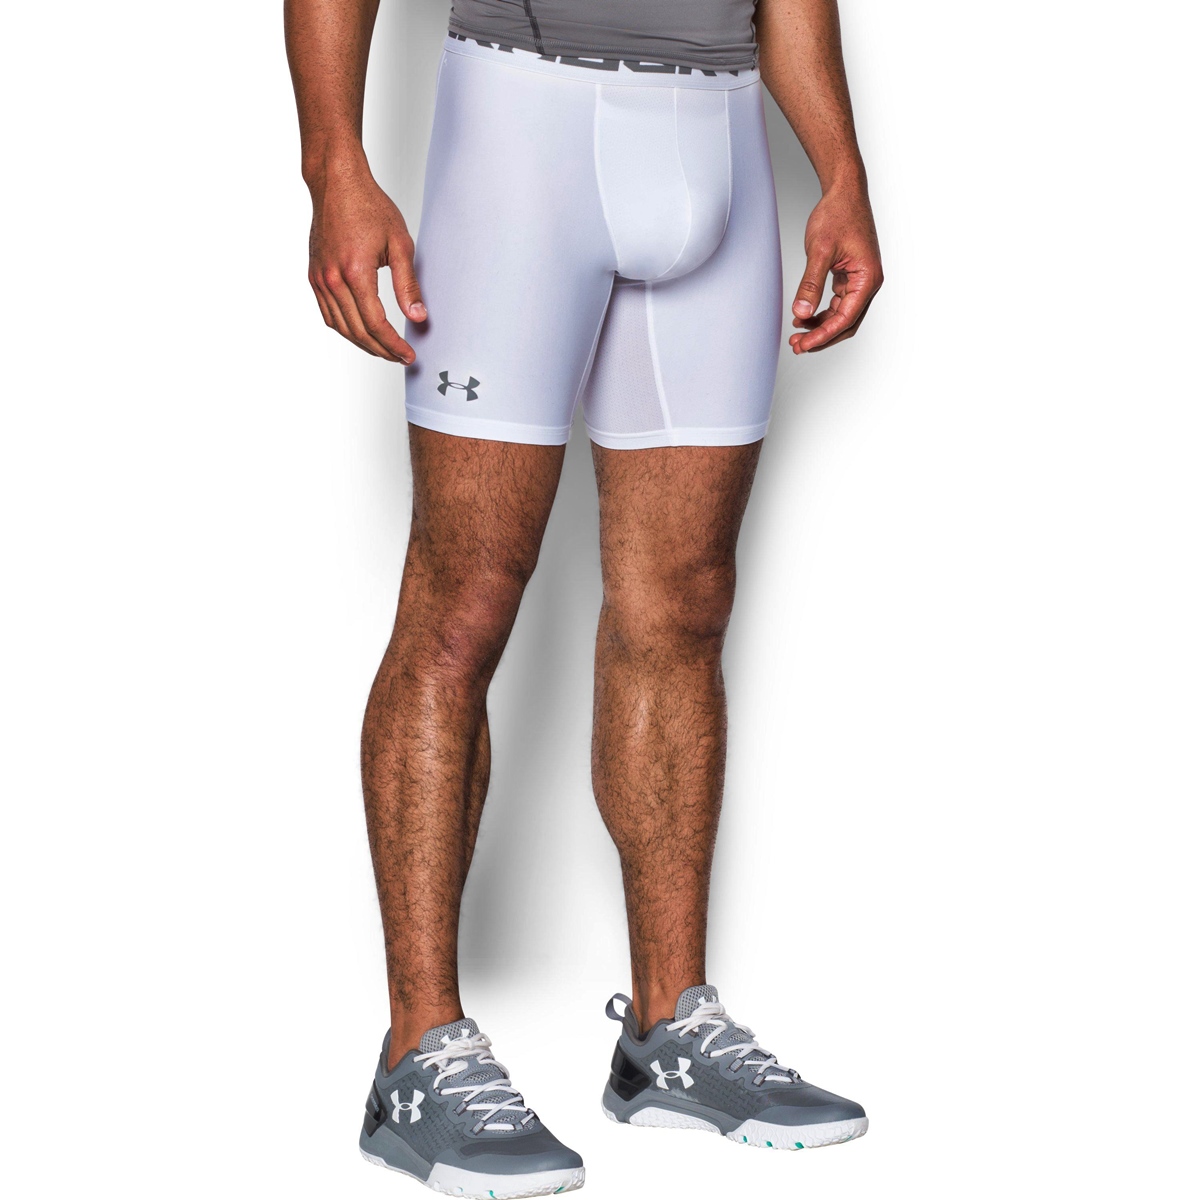 13 Incredible Compression Shorts With Cup For 2023